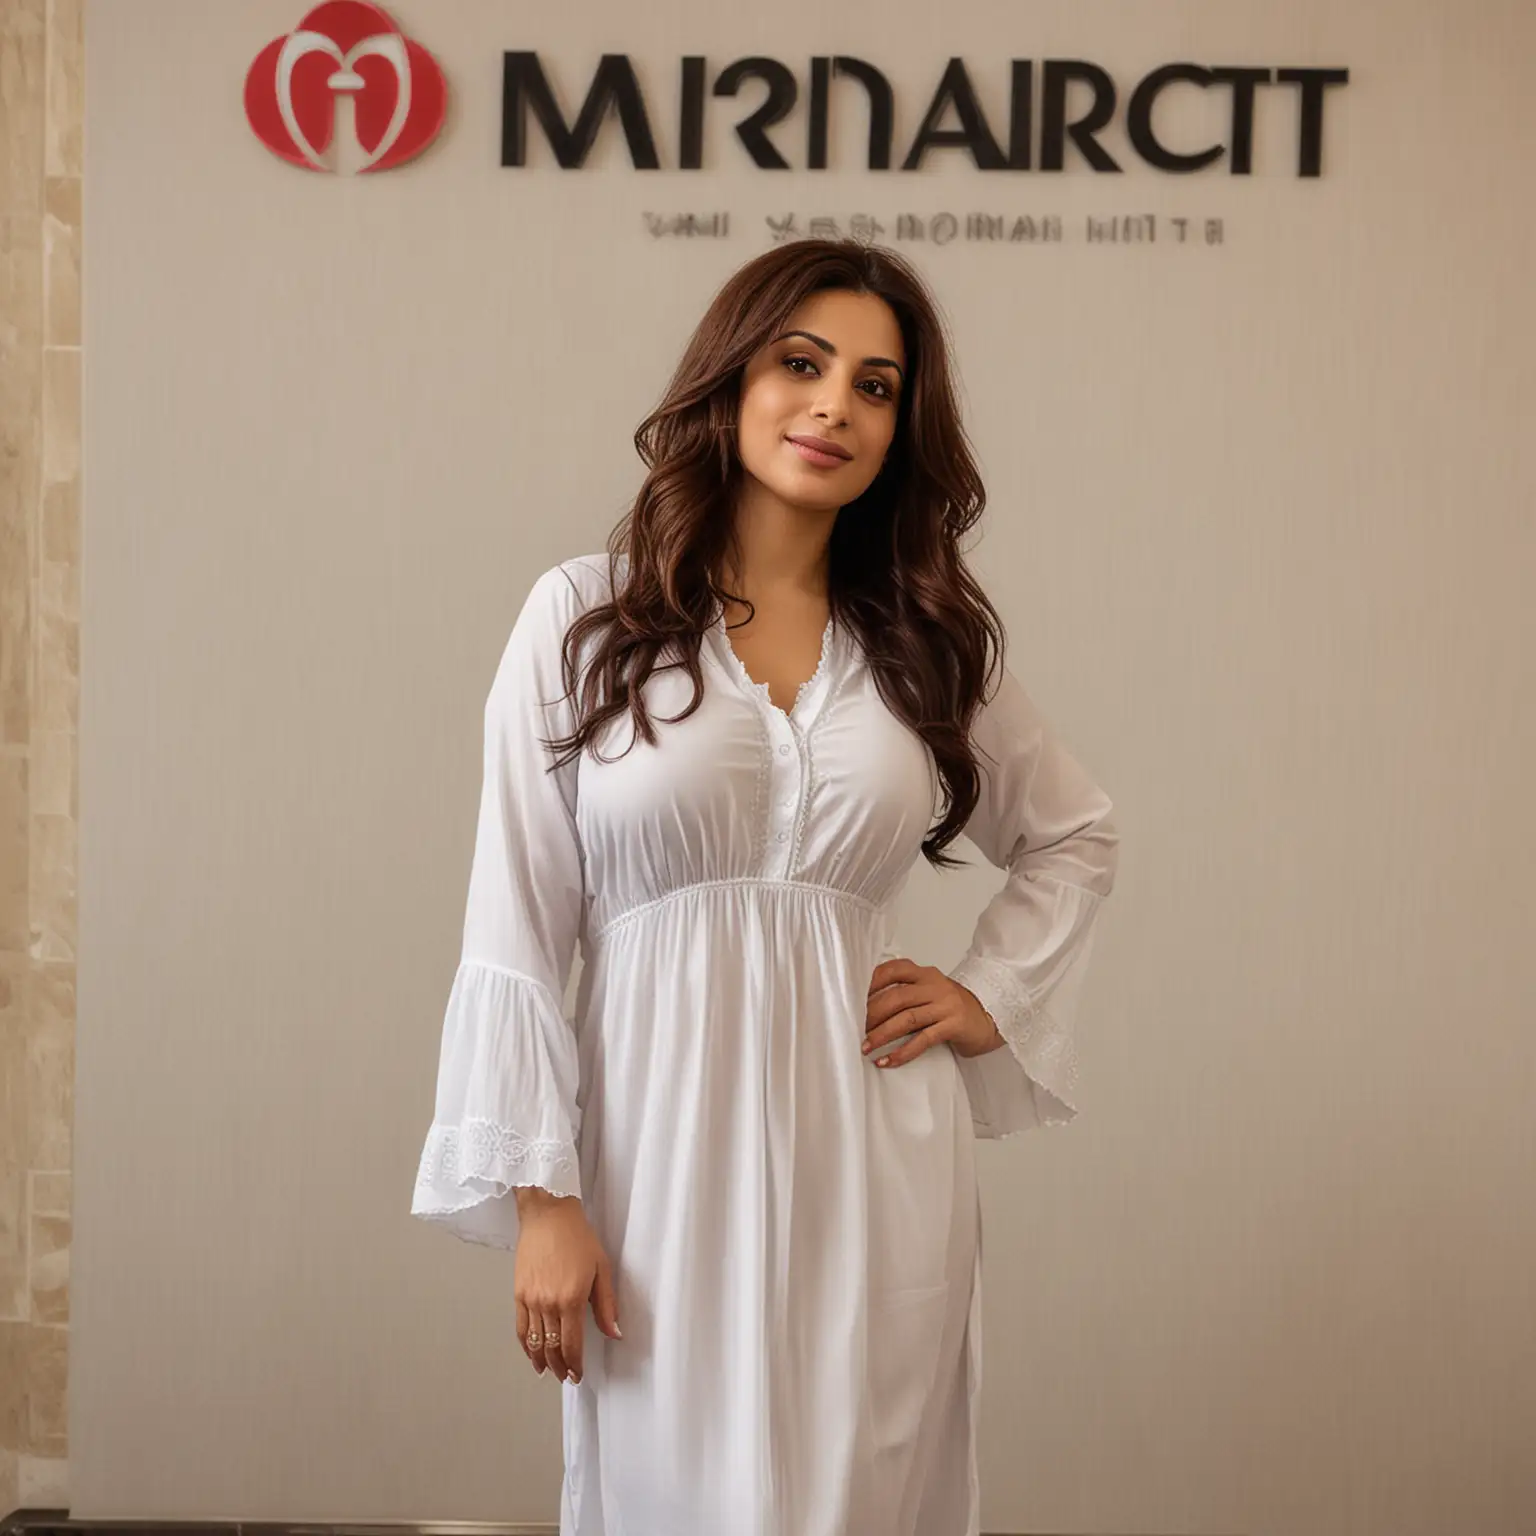 full view of a heartstoppingly beautiful 40-year old Iranian woman. She has very big heavy 36FF breasts, wearing a loose white kameez. She has long luxurious brown hair. Her hands are hidden.
she's standing in front of the marriott hotel logo